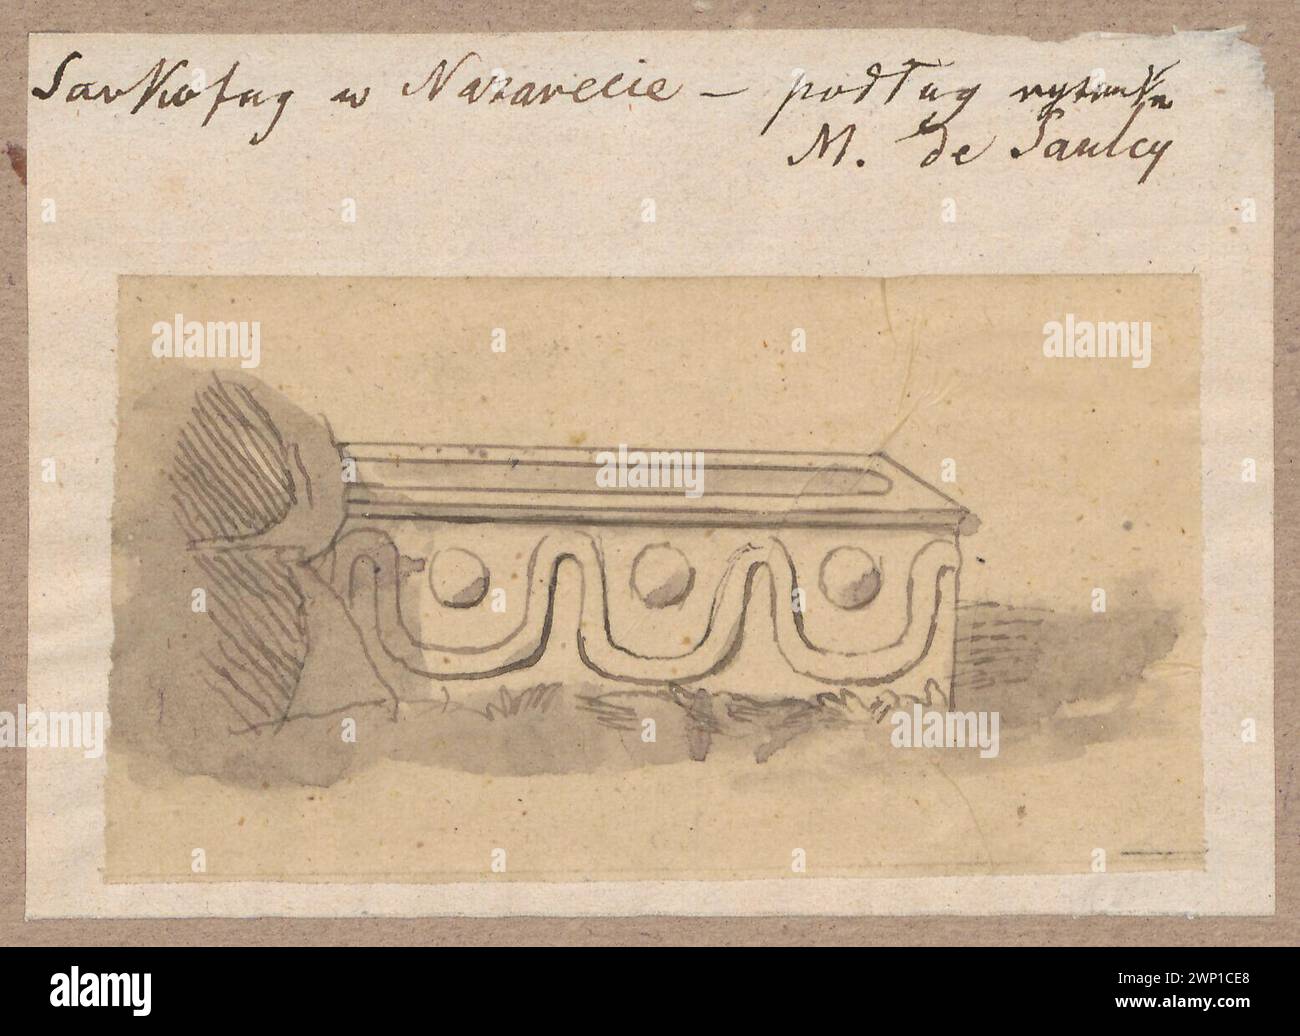 Palestine. Sarcophagus in Nazareth, according to the drawing of M. de Saulcy; Lesser, Aleksander (1814-1884); 1830-1884 (1830-00-00-1884-00-00);Lesser, Aleksander (1814-1884), Lesser, Aleksander (1814-1884) - collections, Lesser, Emiljan Stanisław (Baron - 1847-1912), Lesser, Emiljan Stanisław (Baron - 1847-1912) - collection, Lesser, Wiktor Stanisław Zygmunt (Baron - 1853-1935), Lesser, Wiktor Stanisław Zygmunt (Baron - 1853-1935) - collection, Nazaret (Israel), Palestine, architecture, foreign architecture, gift, gift (provenance), tombs, sarcophagi Stock Photo